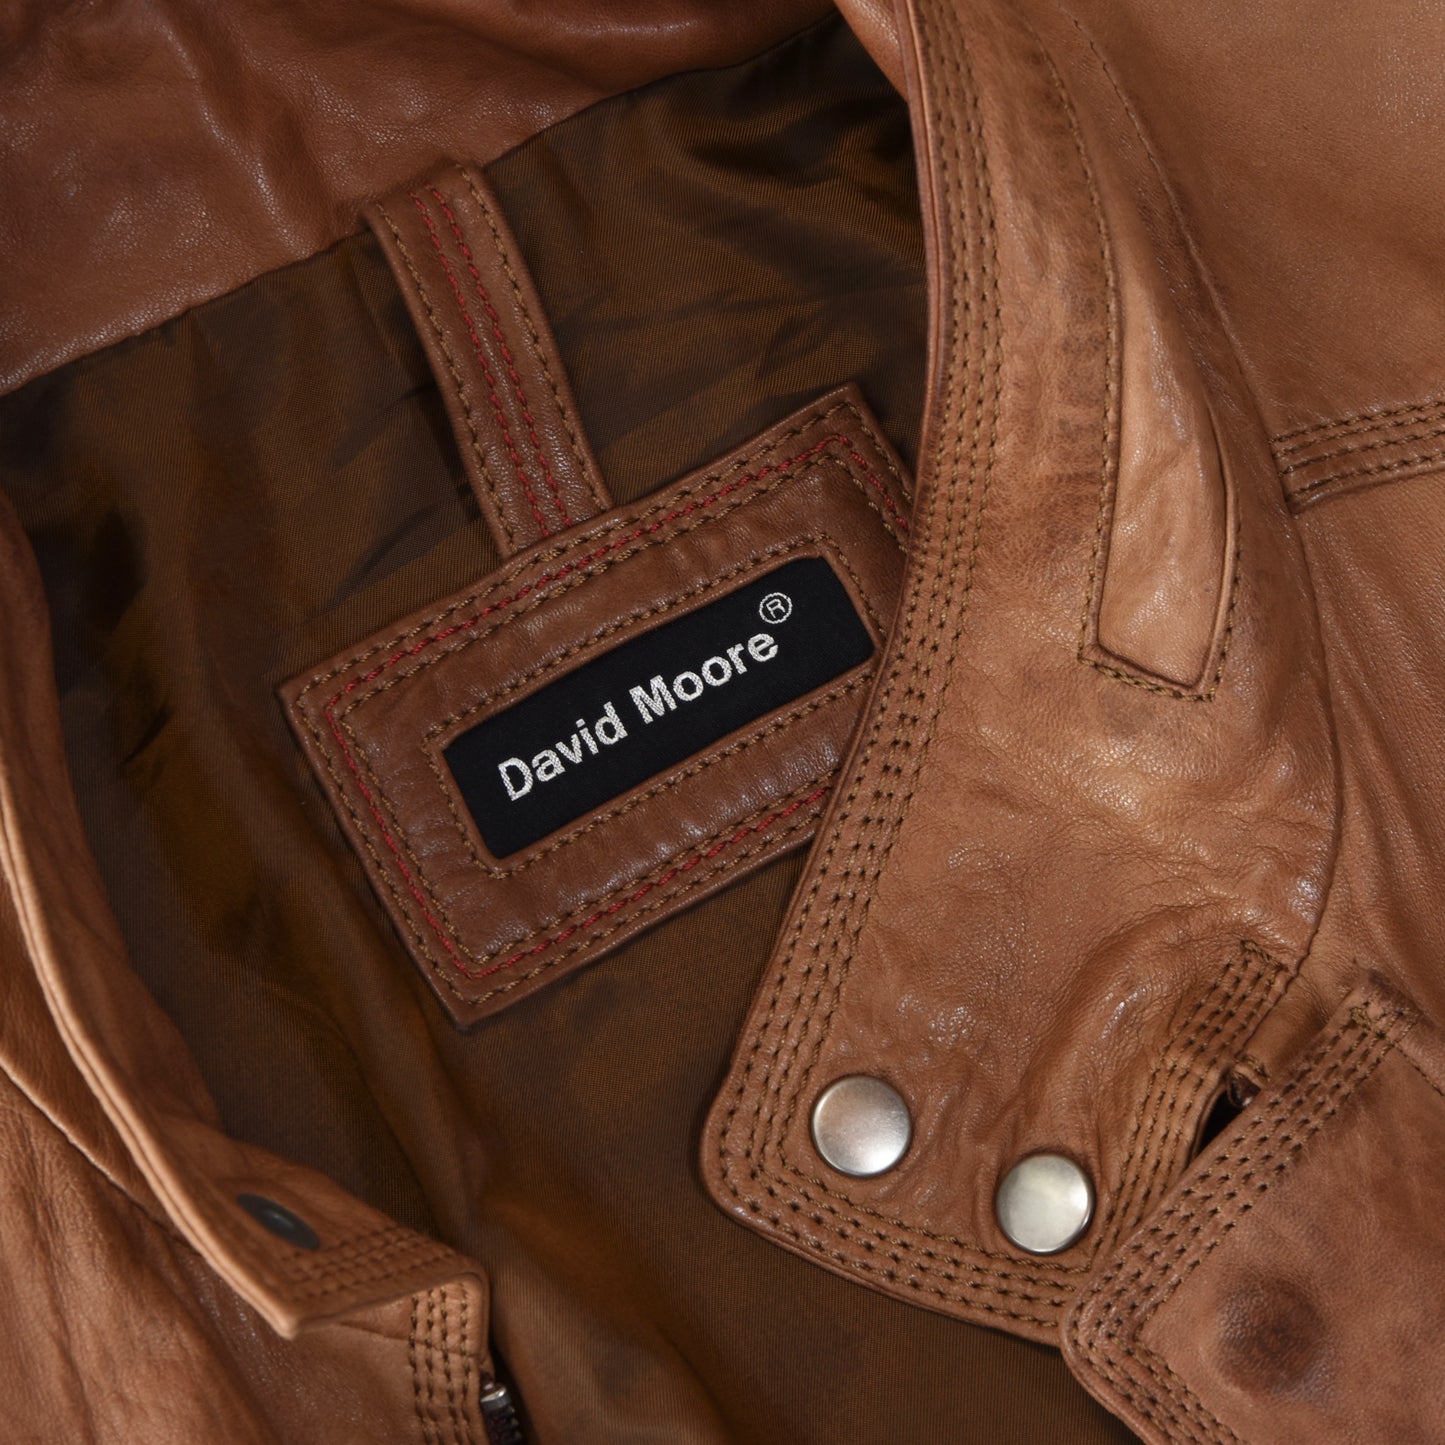 David Moore Leather Jacket Size 54 - Brown